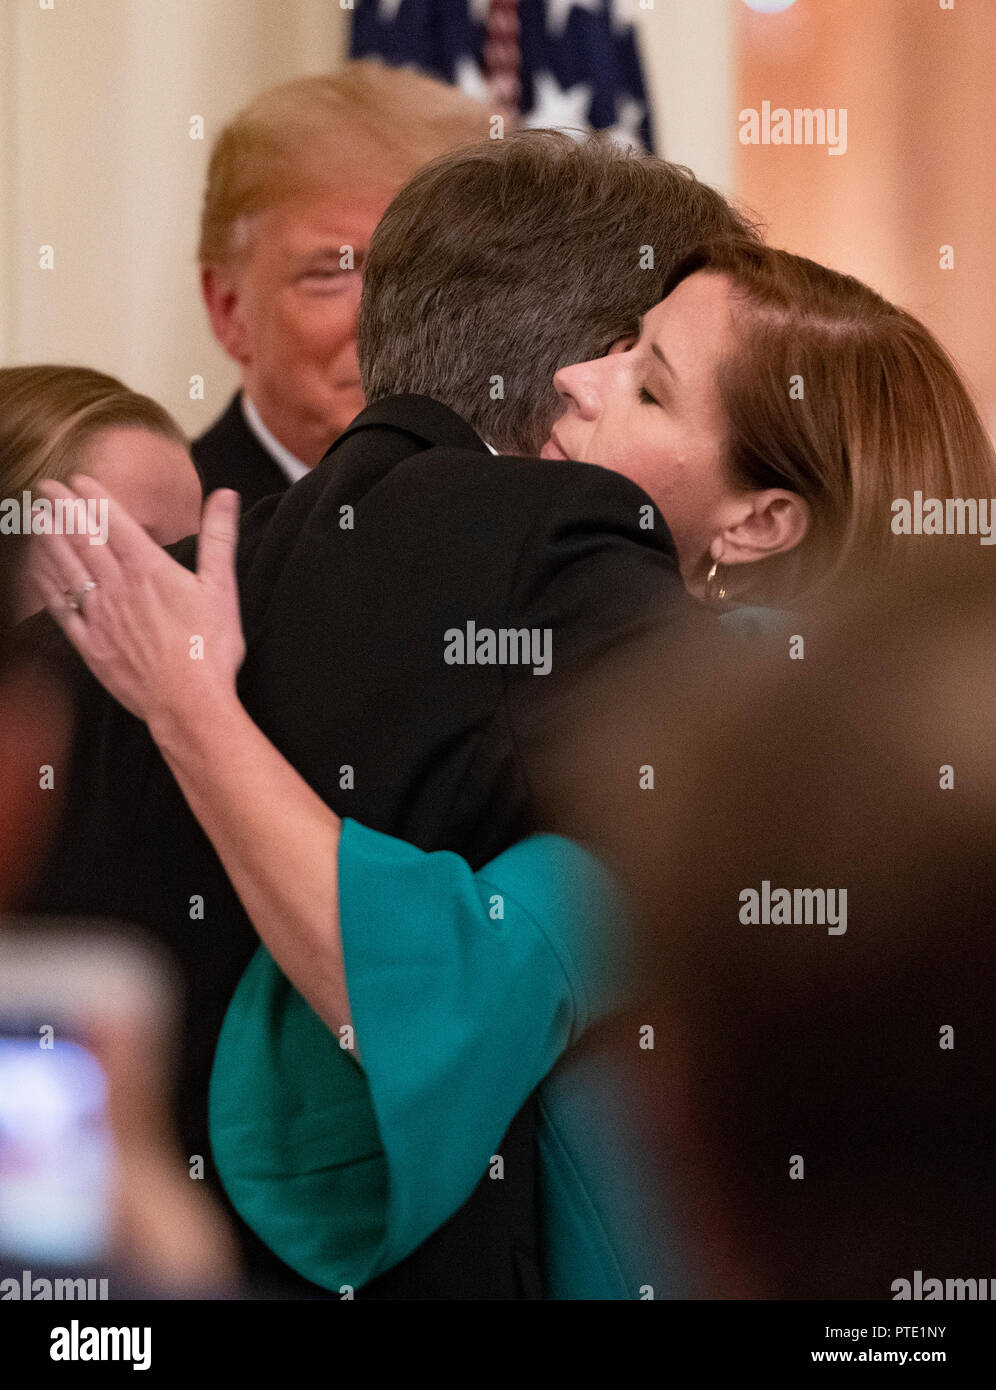 Ashley Kavanaugh hugs her husband Associate Justice of the Supreme Court Brett Kavanaugh after taking the Judicial Oath from former Associate Justice of the Supreme Court Anthony M. Kennedy in the East Room of the White House in Washington, DC on Monday, October 8, 2018. Kavanaugh formally took the oath on Saturday, hours after he was confirmed by the US Senate. US President Donald J. Trump looks on from the rear. Credit: Ron Sachs/CNP (RESTRICTION: NO New York or New Jersey Newspapers or newspapers within a 75 mile radius of New York City) | usage worldwide Stock Photo